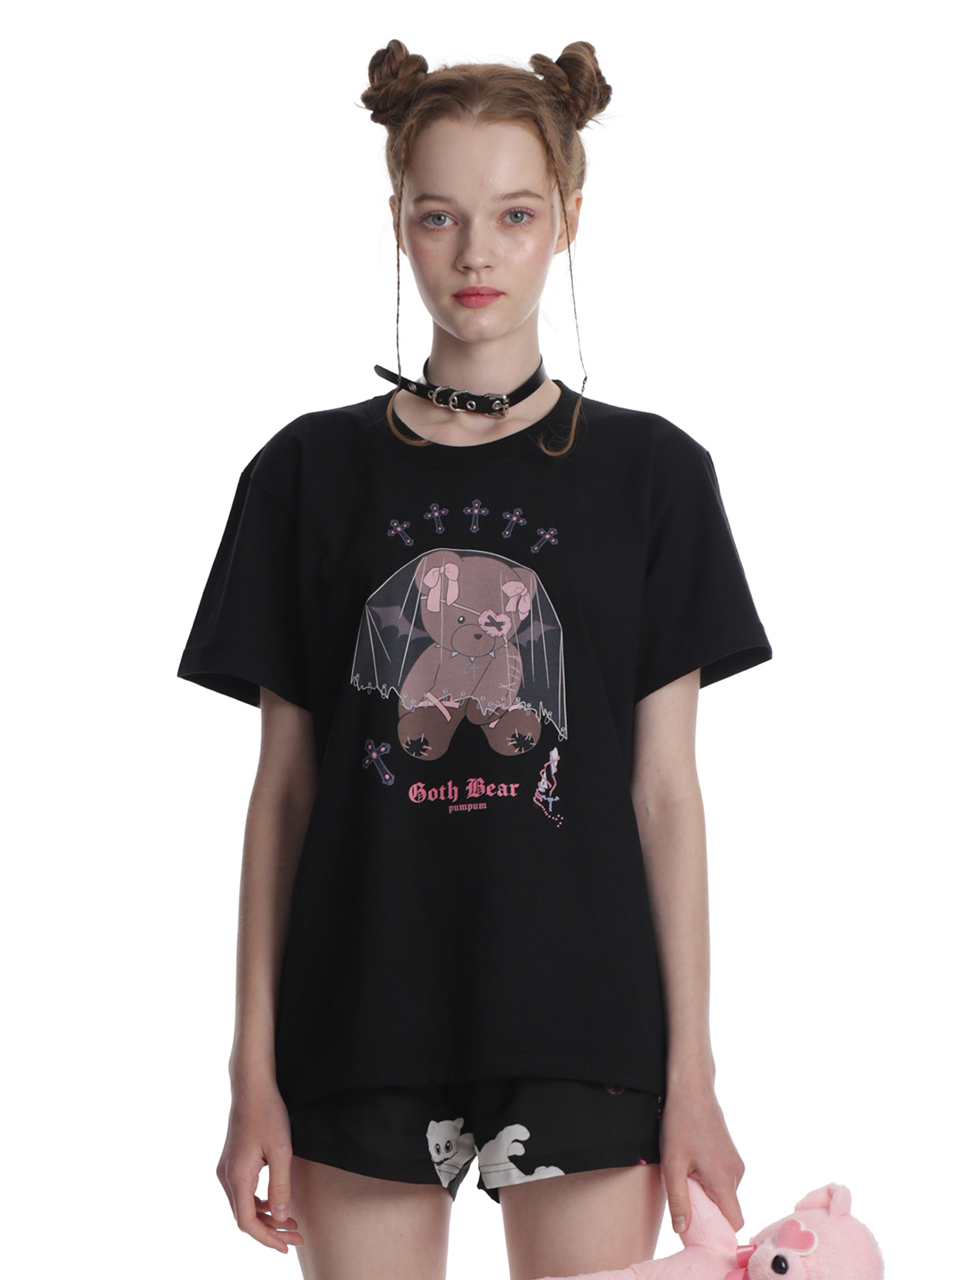 [sold out] 0 1 goth bear t-shirt - BLACK